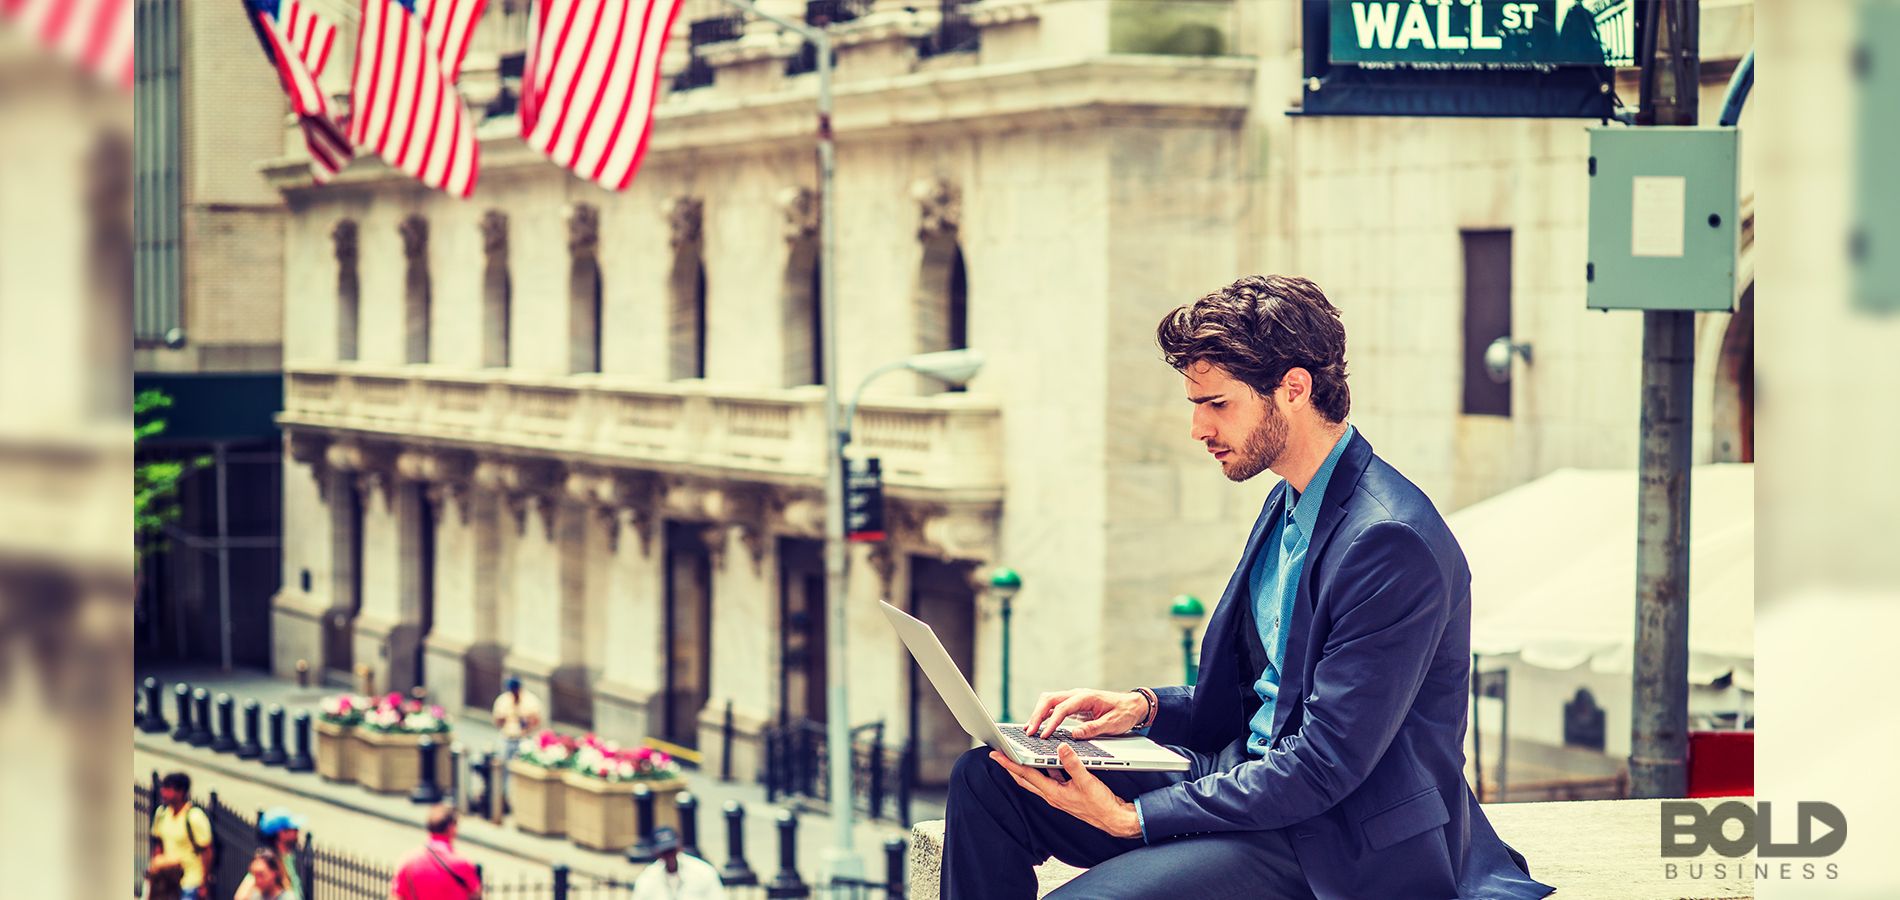 A dude using a trading app while sitting above Wall Street like a gargoyle